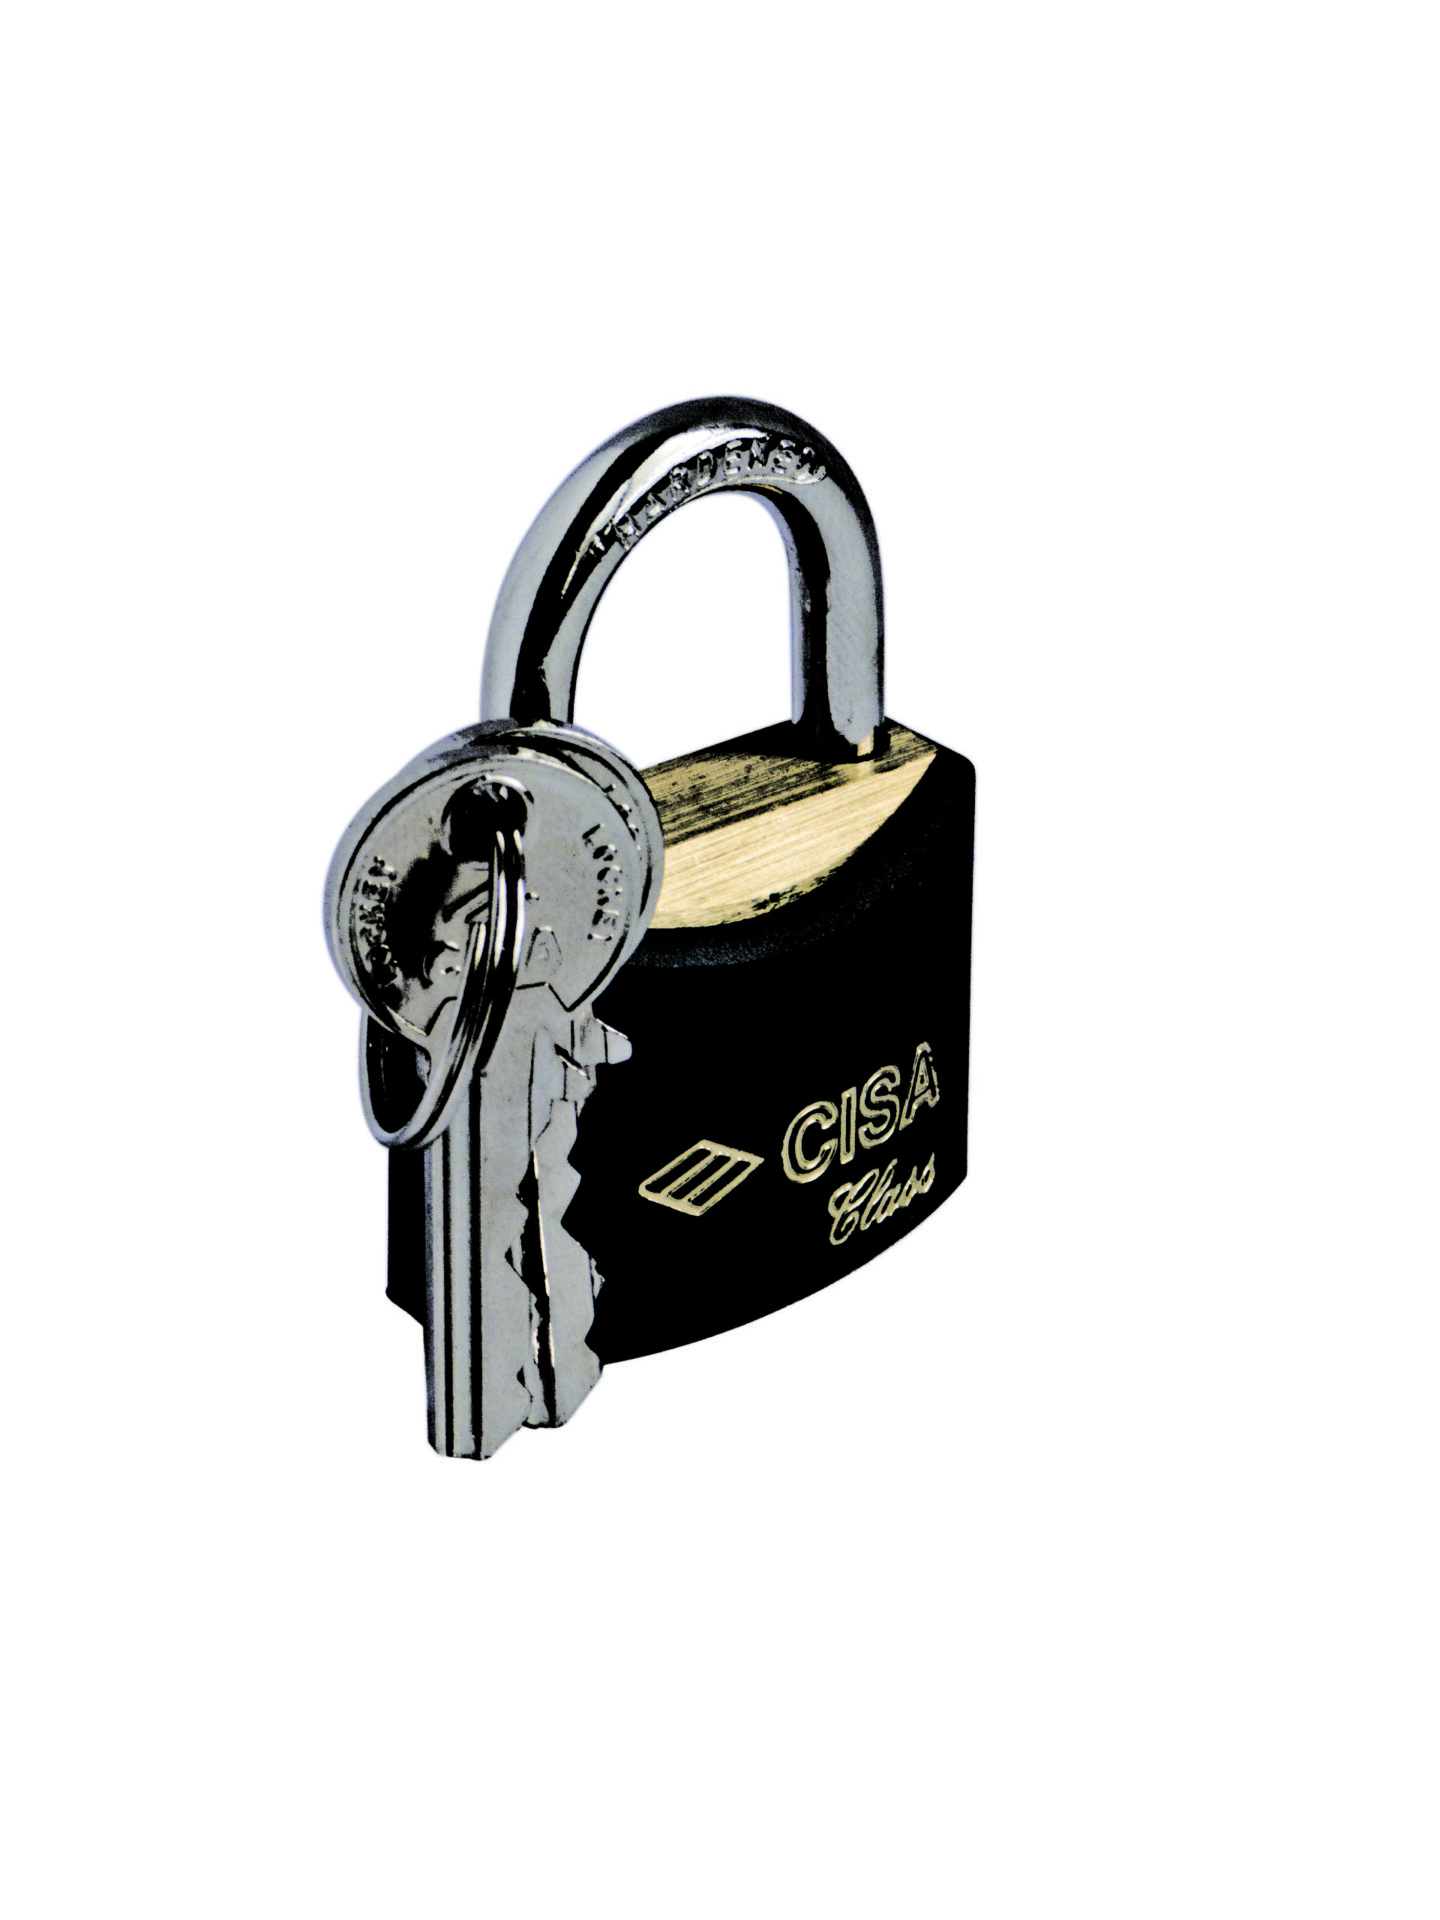 4 sizes from 1-3/16" 30mm CISA Stainless Steel Padlocks to 2-23/64" 60mm 